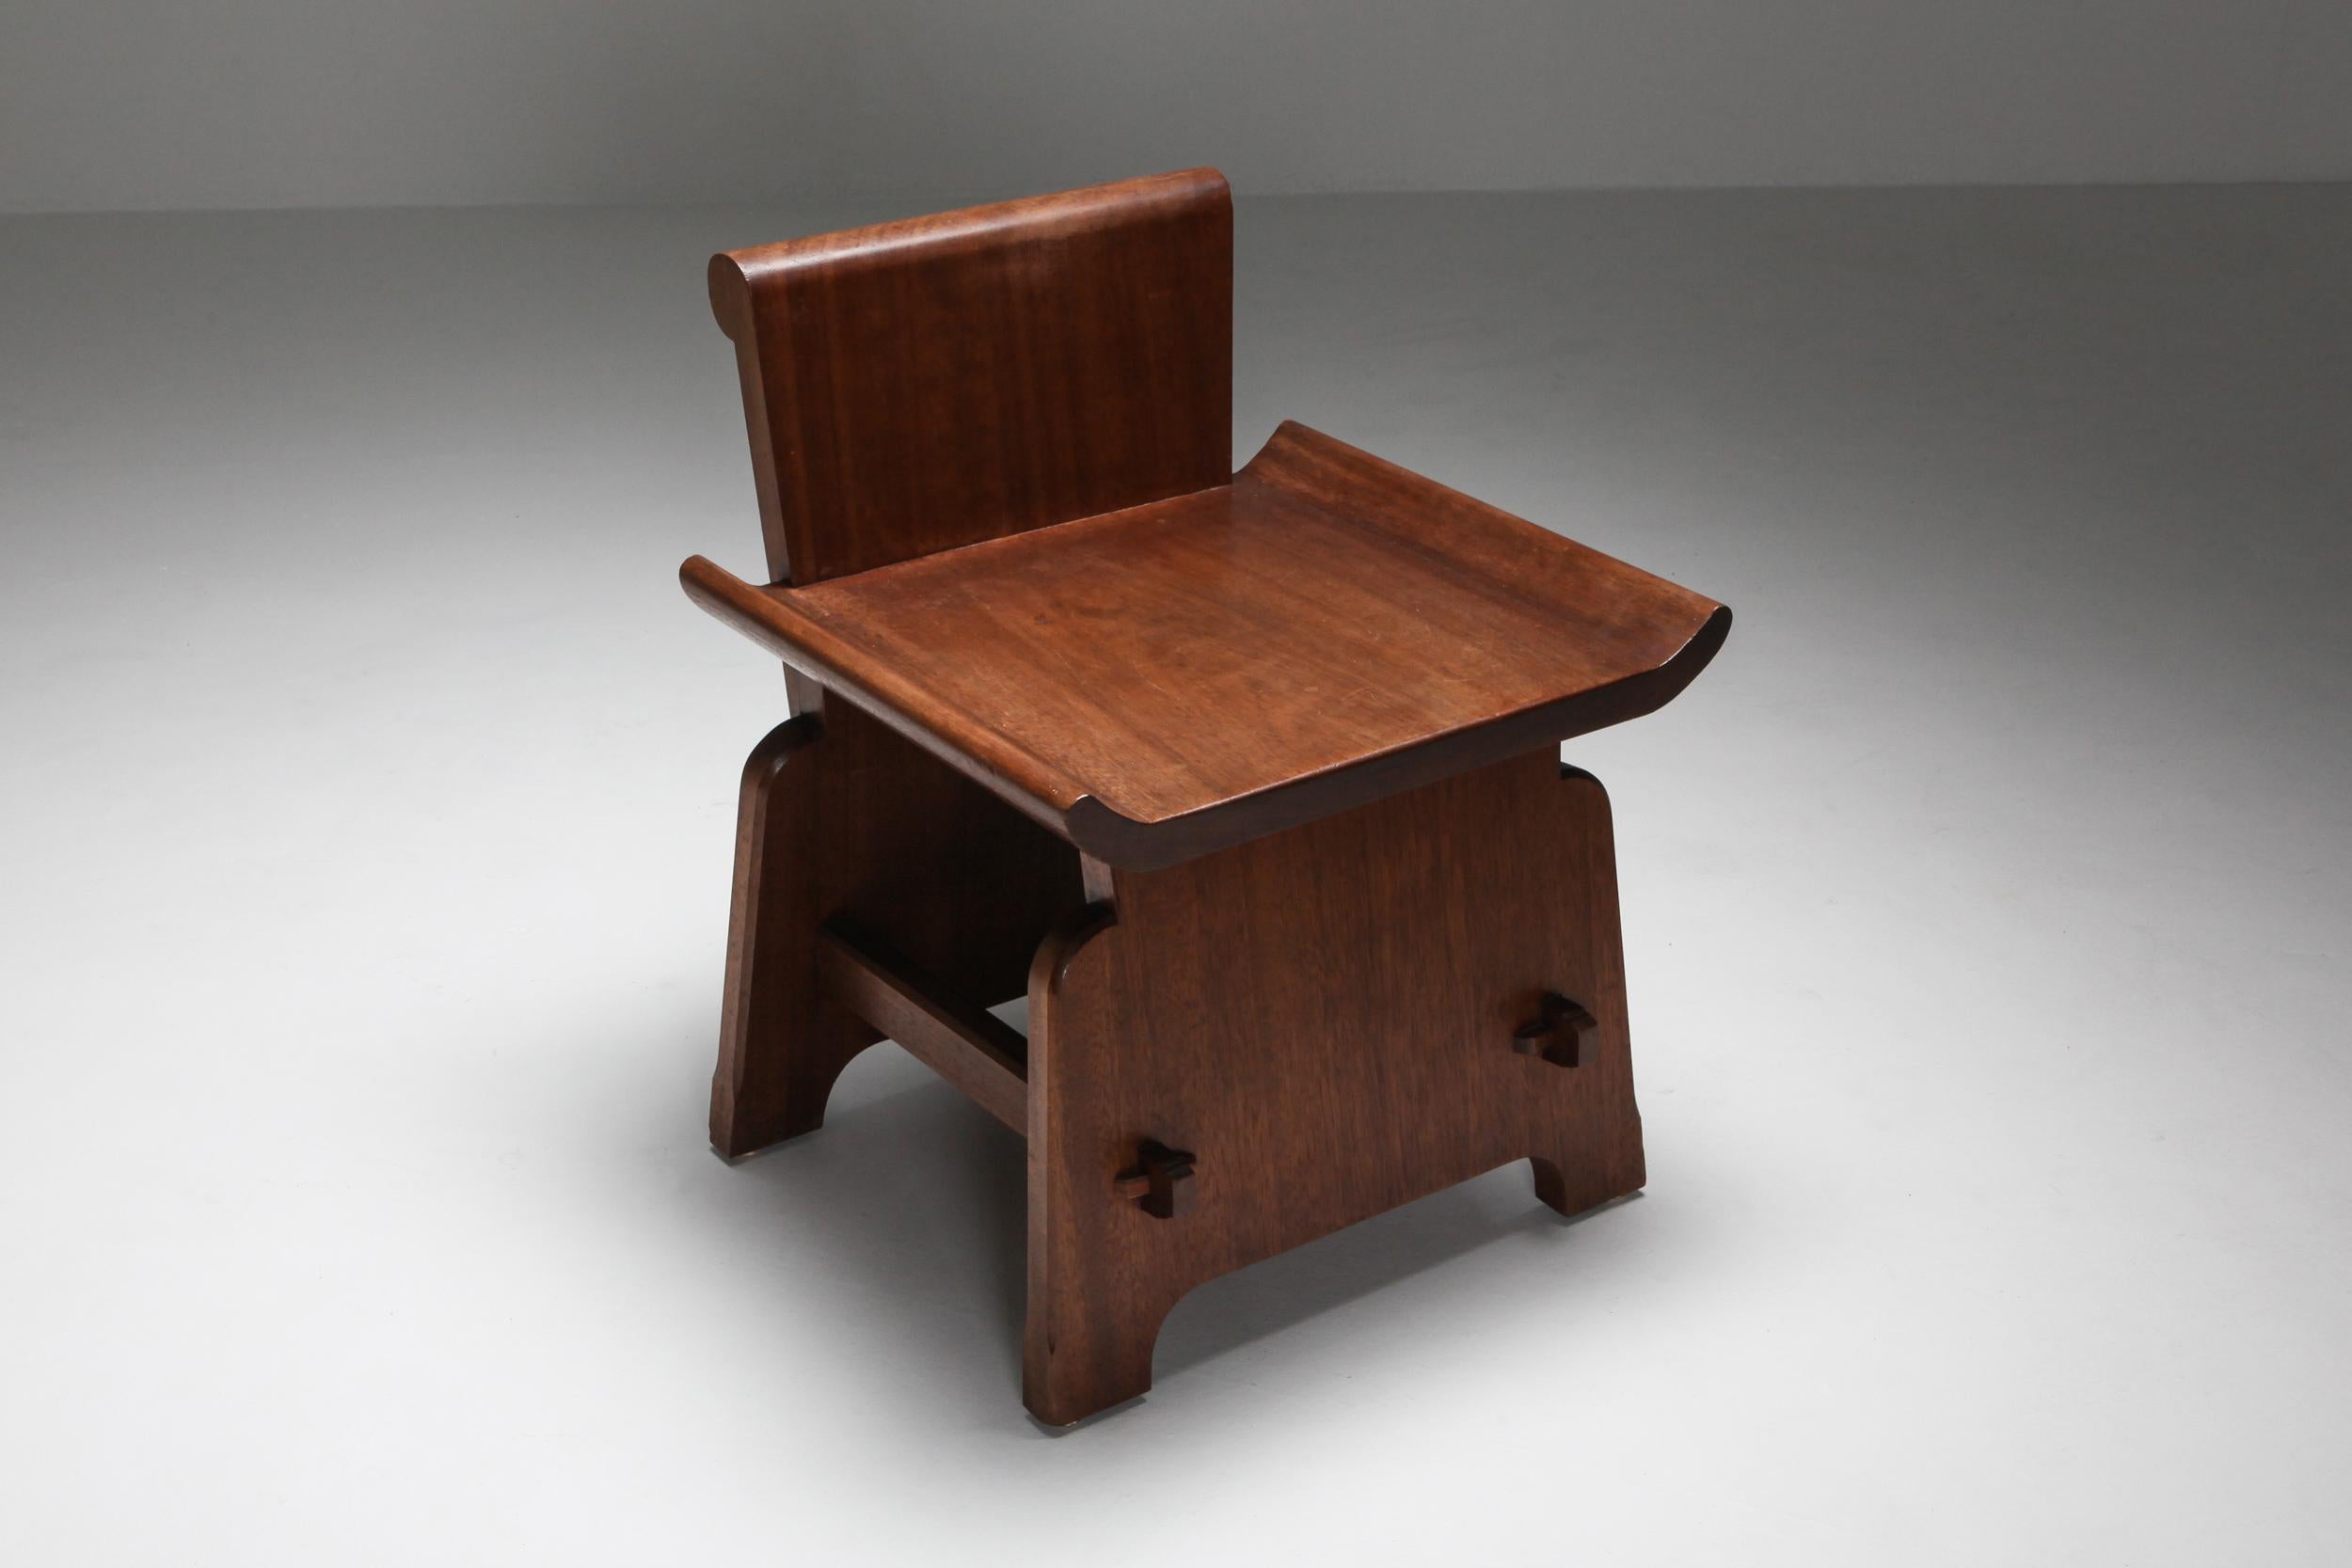 French side chair in solid mahogany; mahogany wood; French craftsmanship
Gorgeous and unusual piece.
 
  